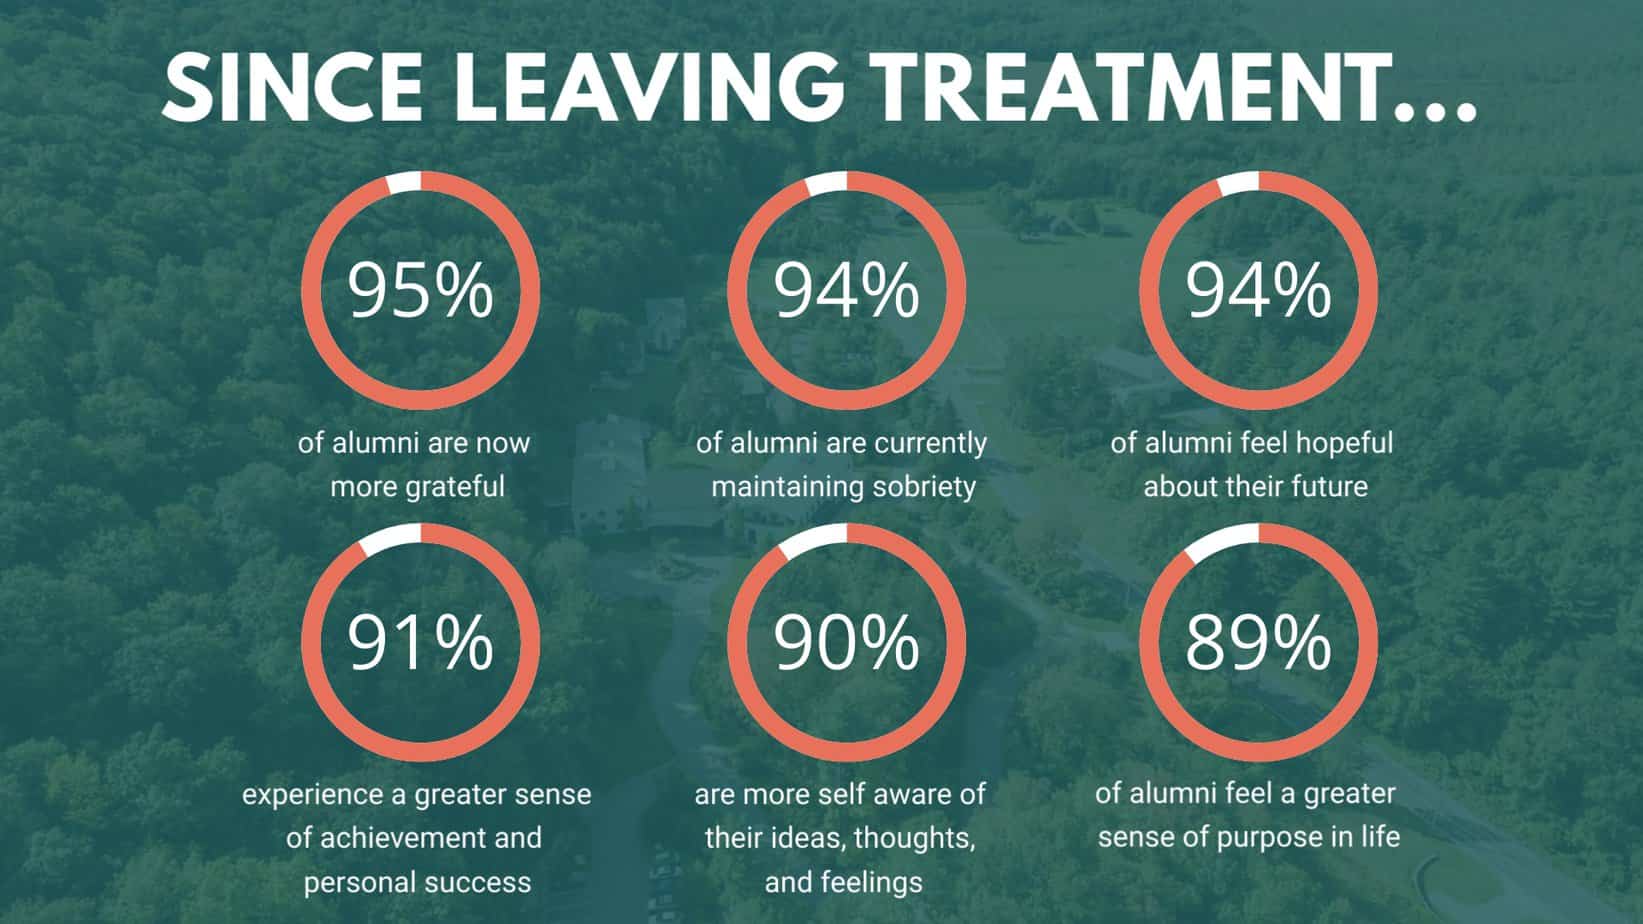 Statistics about addiction treatment at Mountainside treatment center.